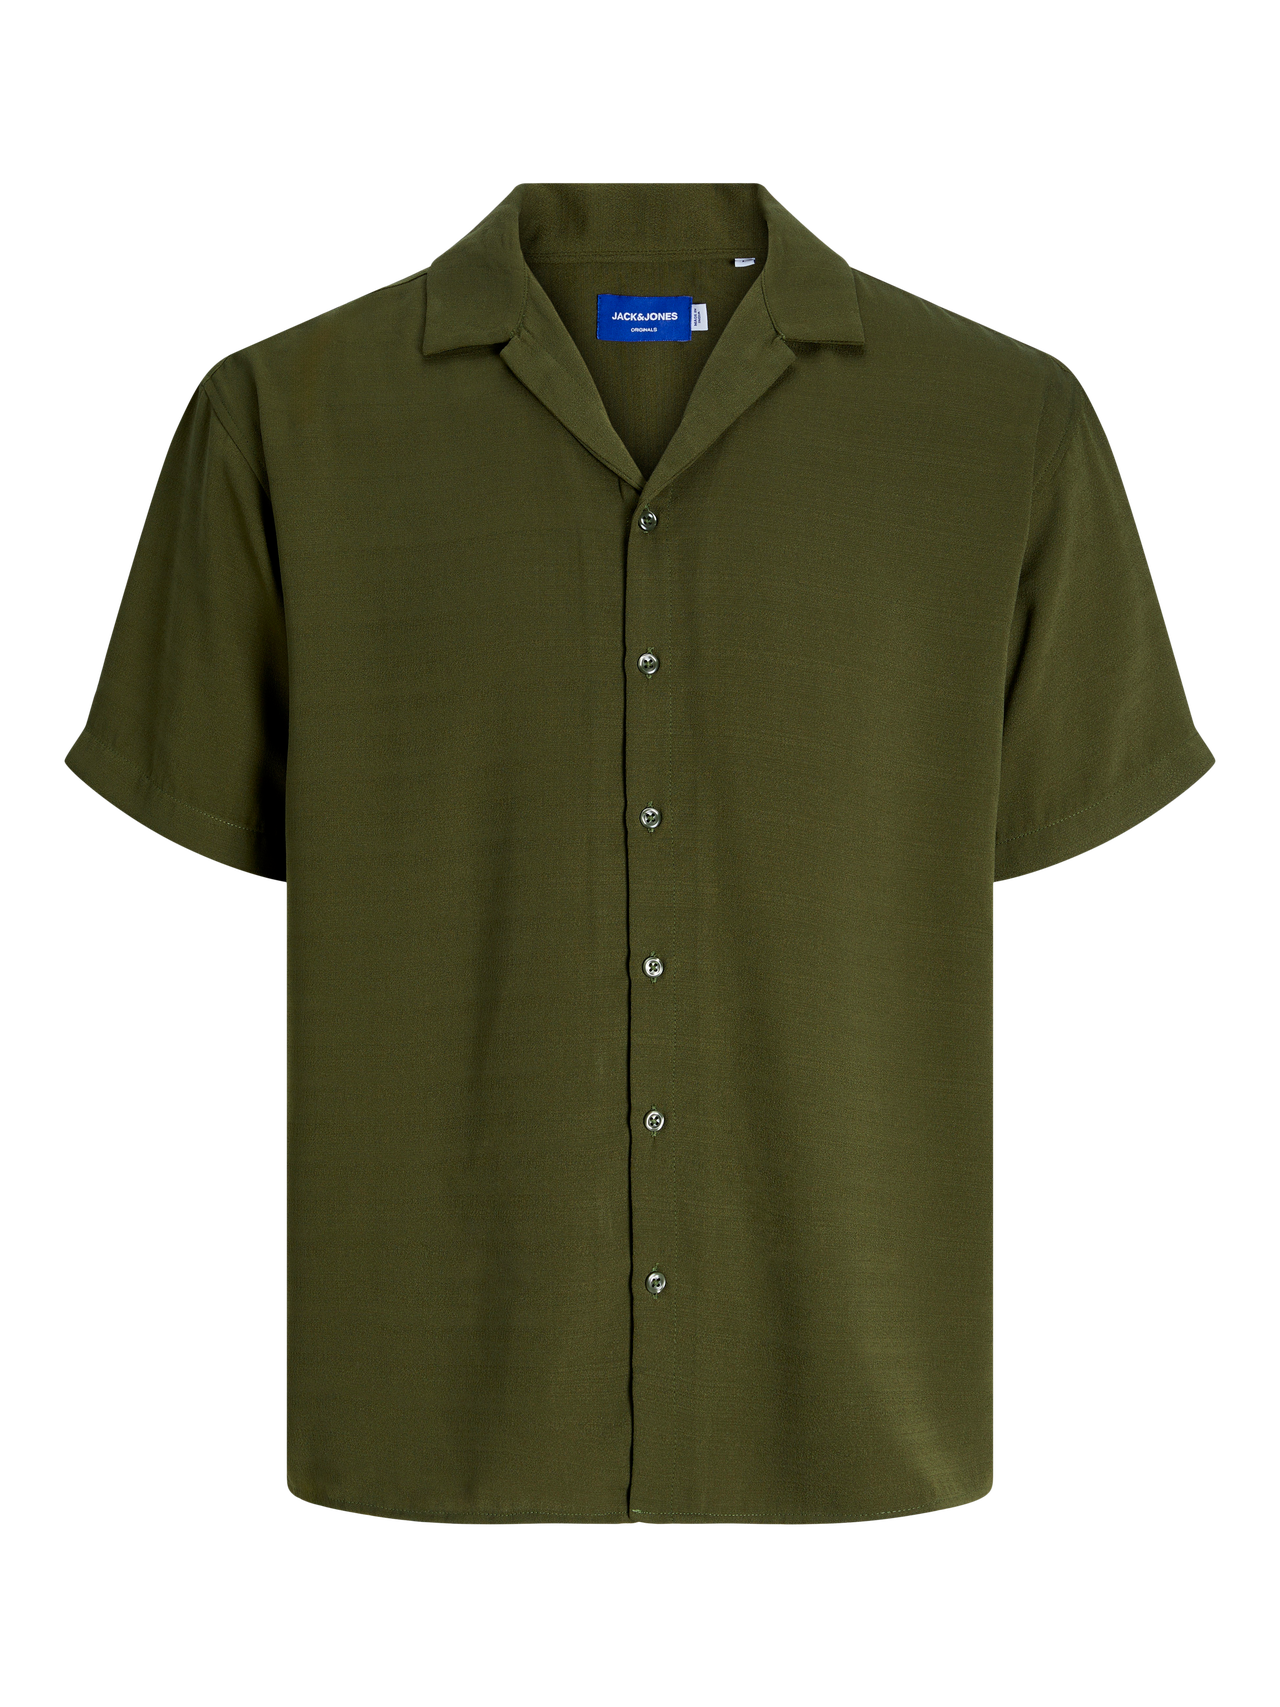 Jack & Jones Relaxed Fit Shirt -Dusty Olive - 12257481